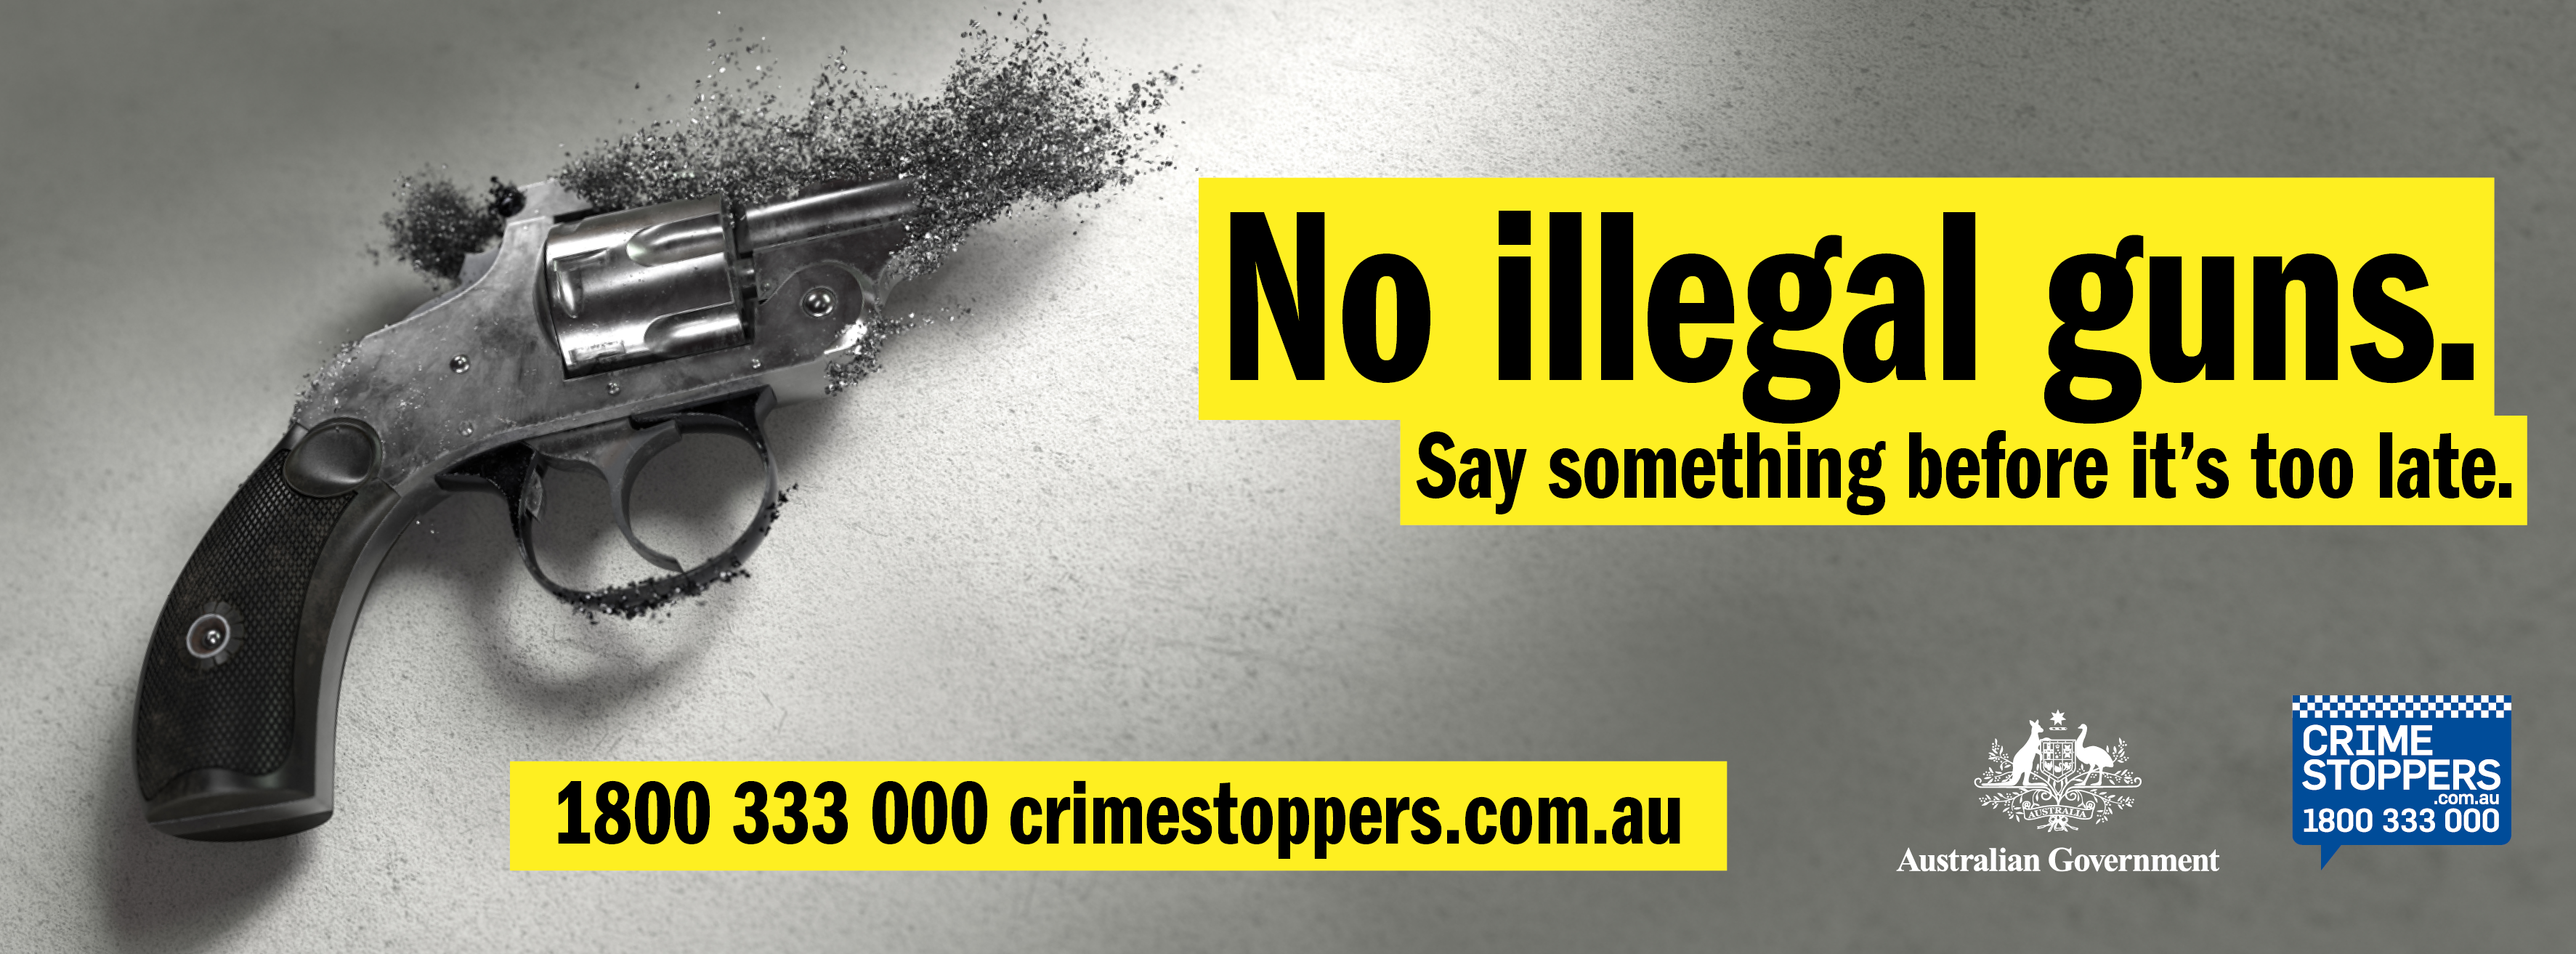 Act Region Crime Stoppers Takes Aim at Illicit Guns in The Local Community